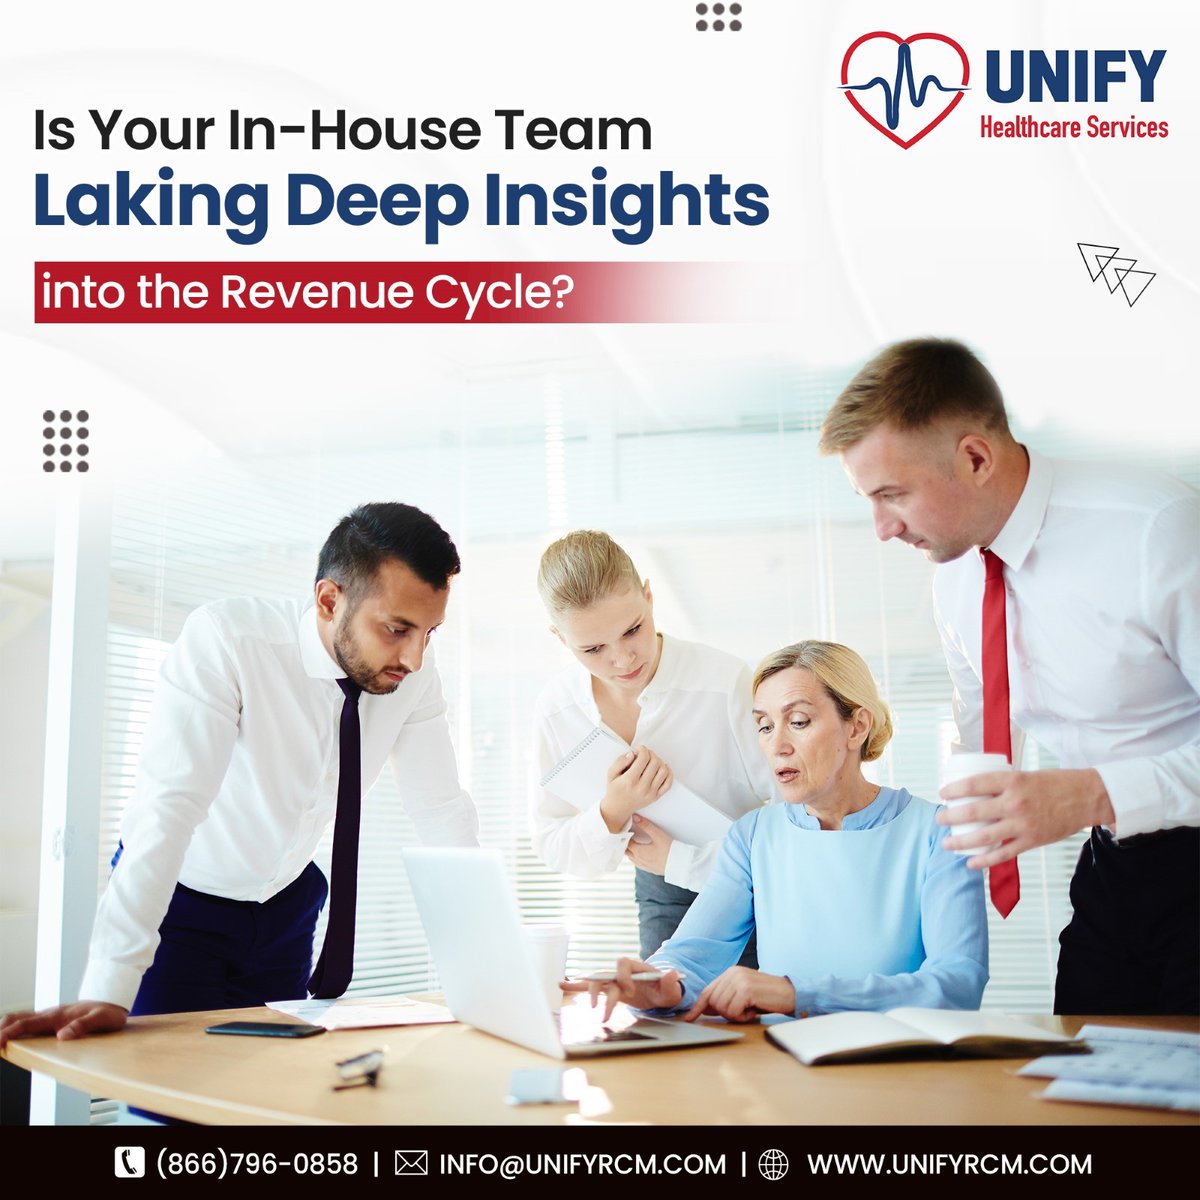 The reasons could be anything from lack of training to not validating the information.
Want to get rid of this cycle?
Outsource the entire procedure to the experienced professionals of Unify RCM.
#dmebilling #UnifyRCM #revenuecycle #revenuecyclemanagement